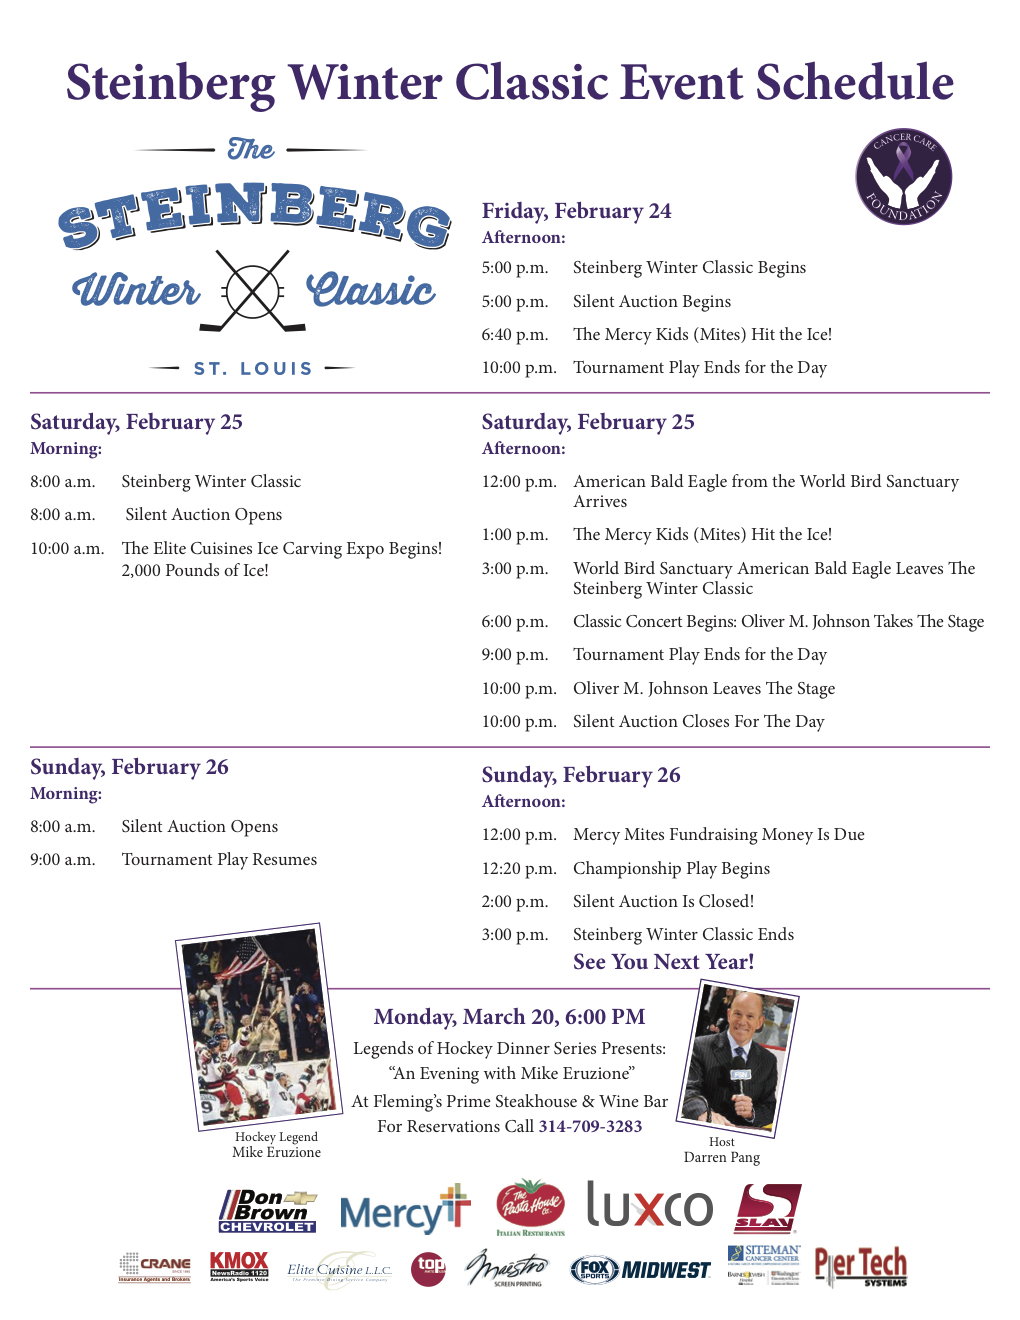 Event Schedule for the Steinberg Winter Classic